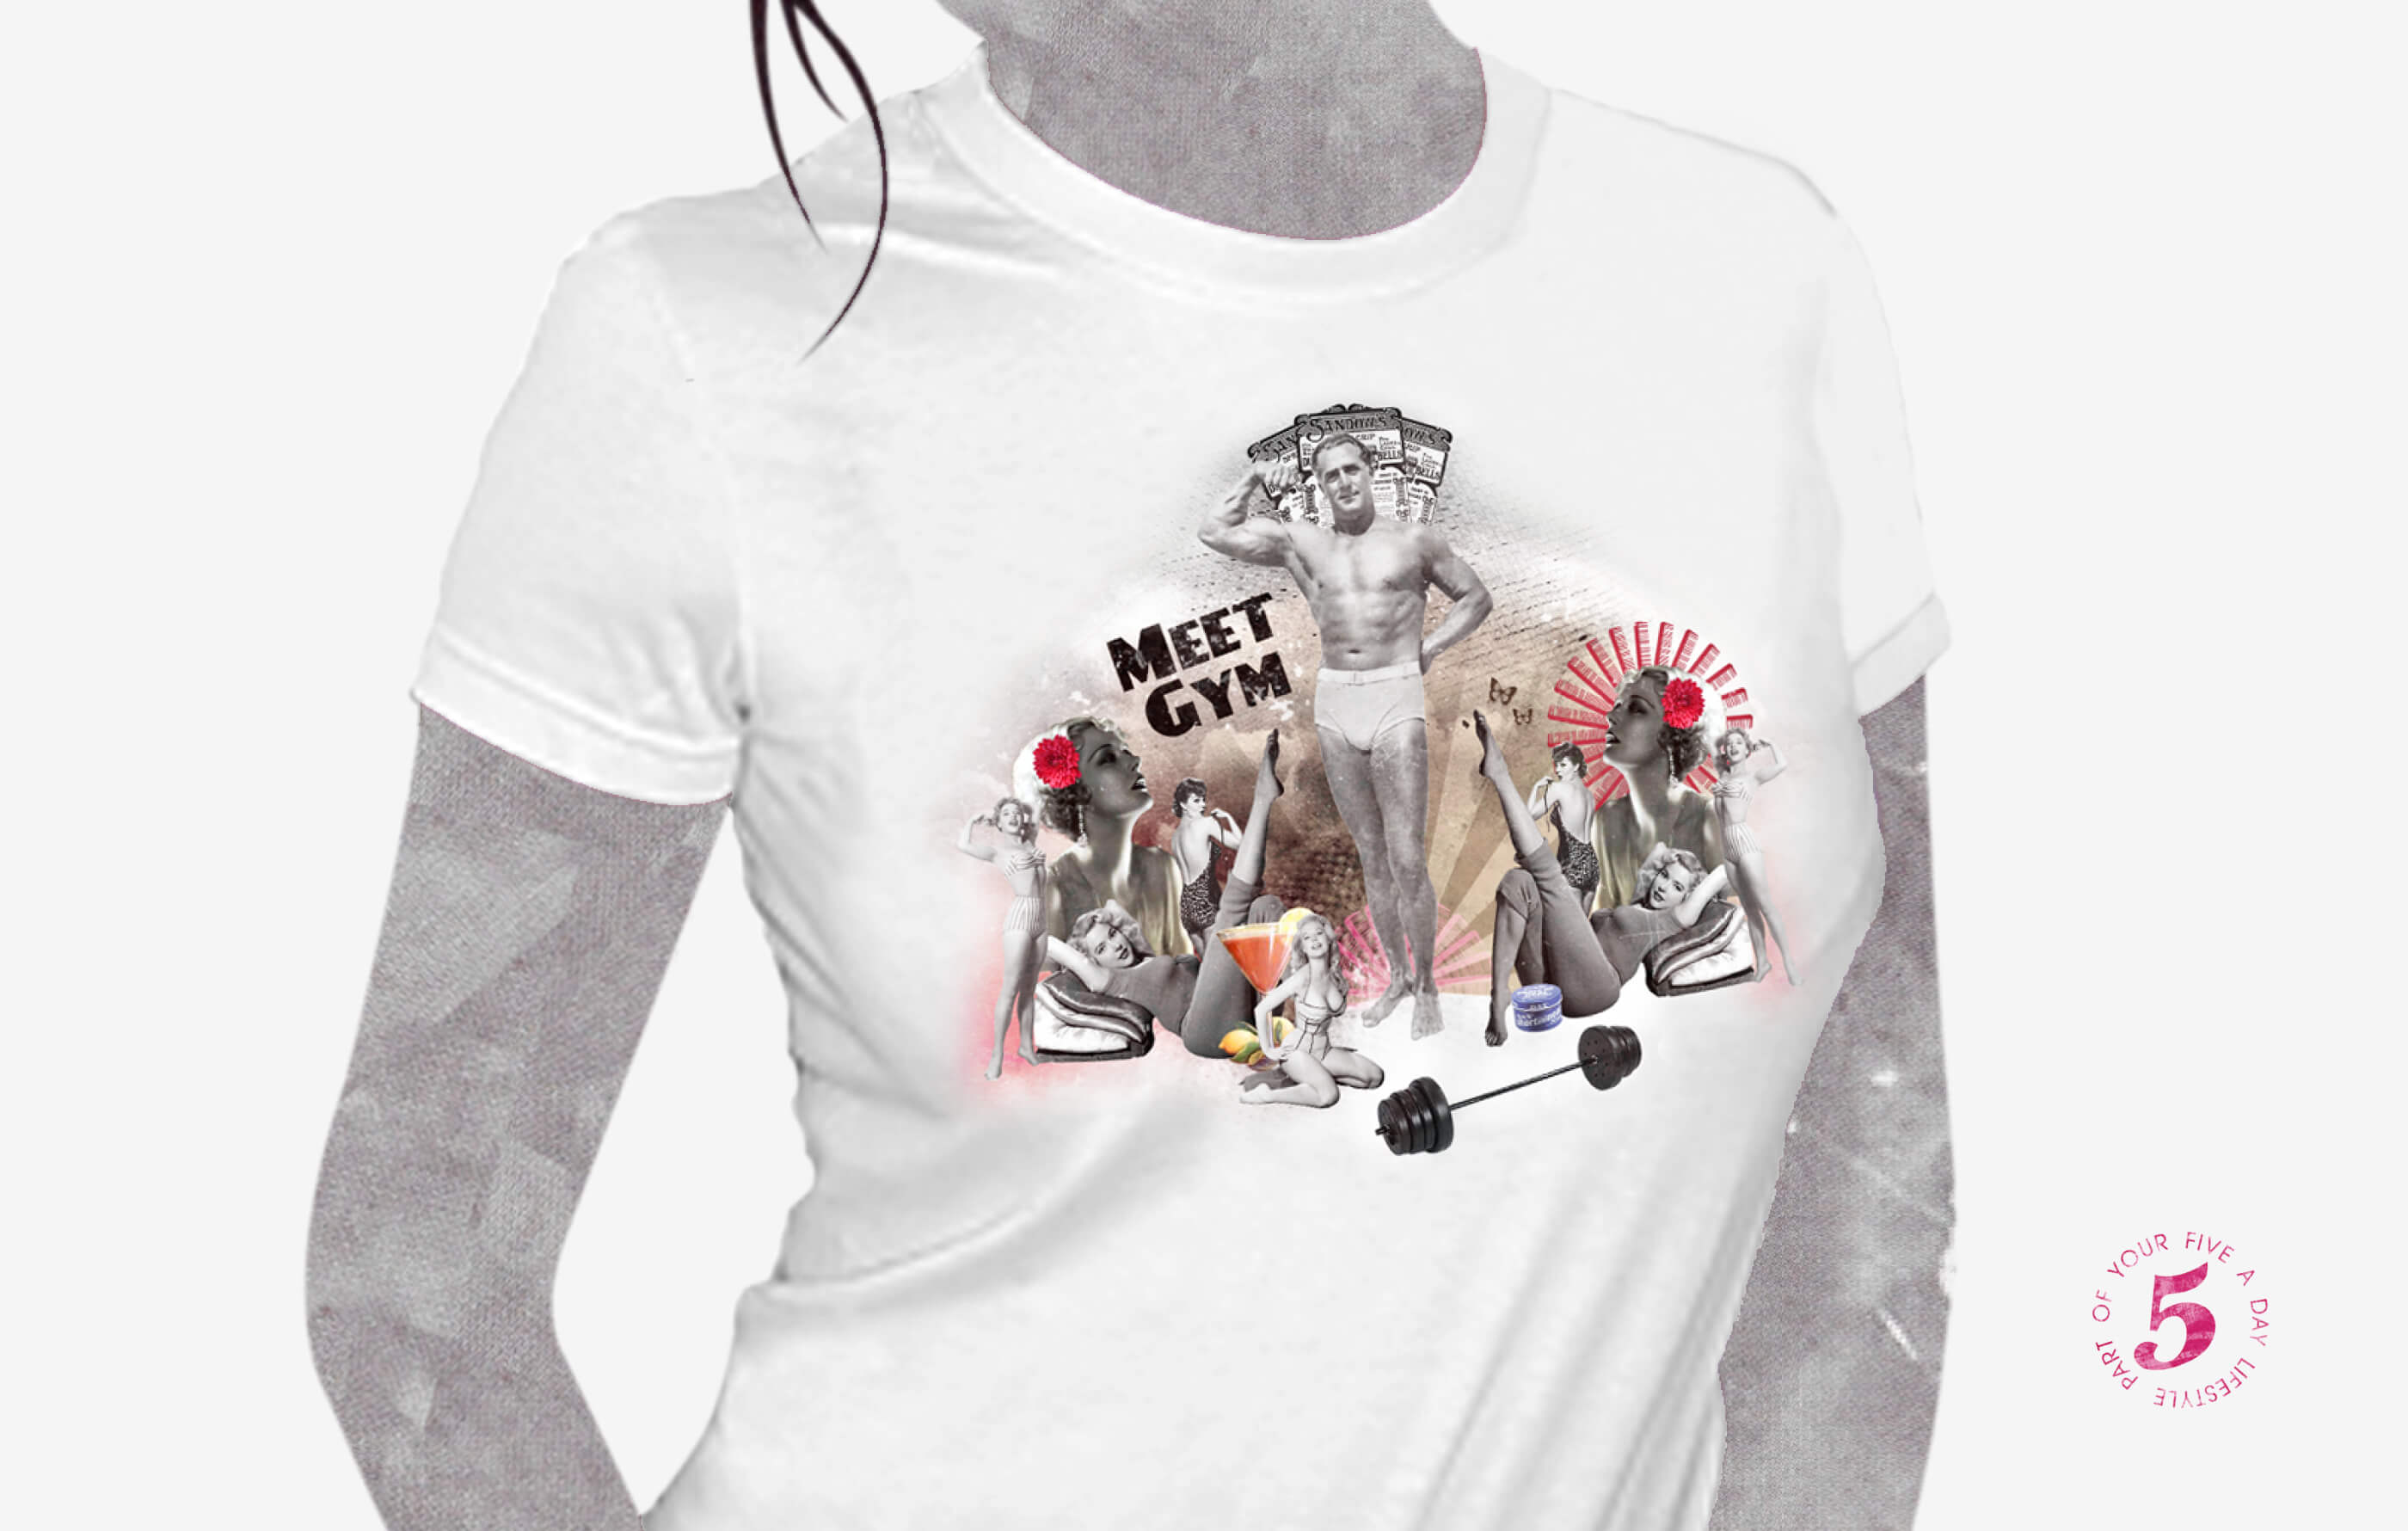 Illustration of a female model with concrete skin and black hair, wearing a 'Meet Gym' t shirt design on a light grey background